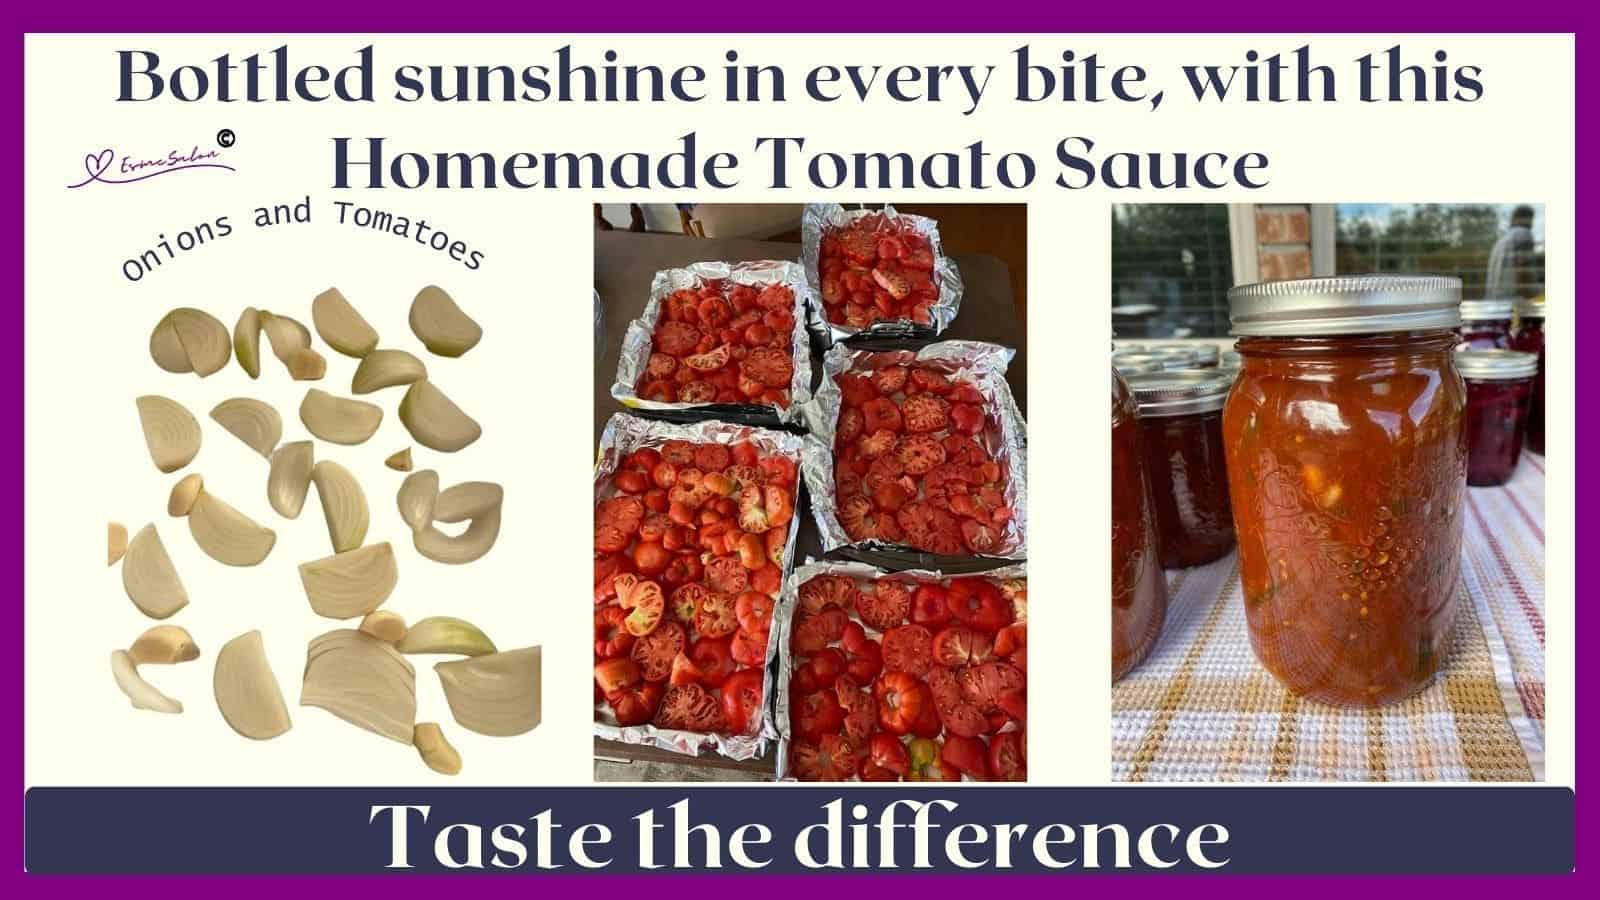 An image of Homemade Bottled Tomato Sauce and still in the making